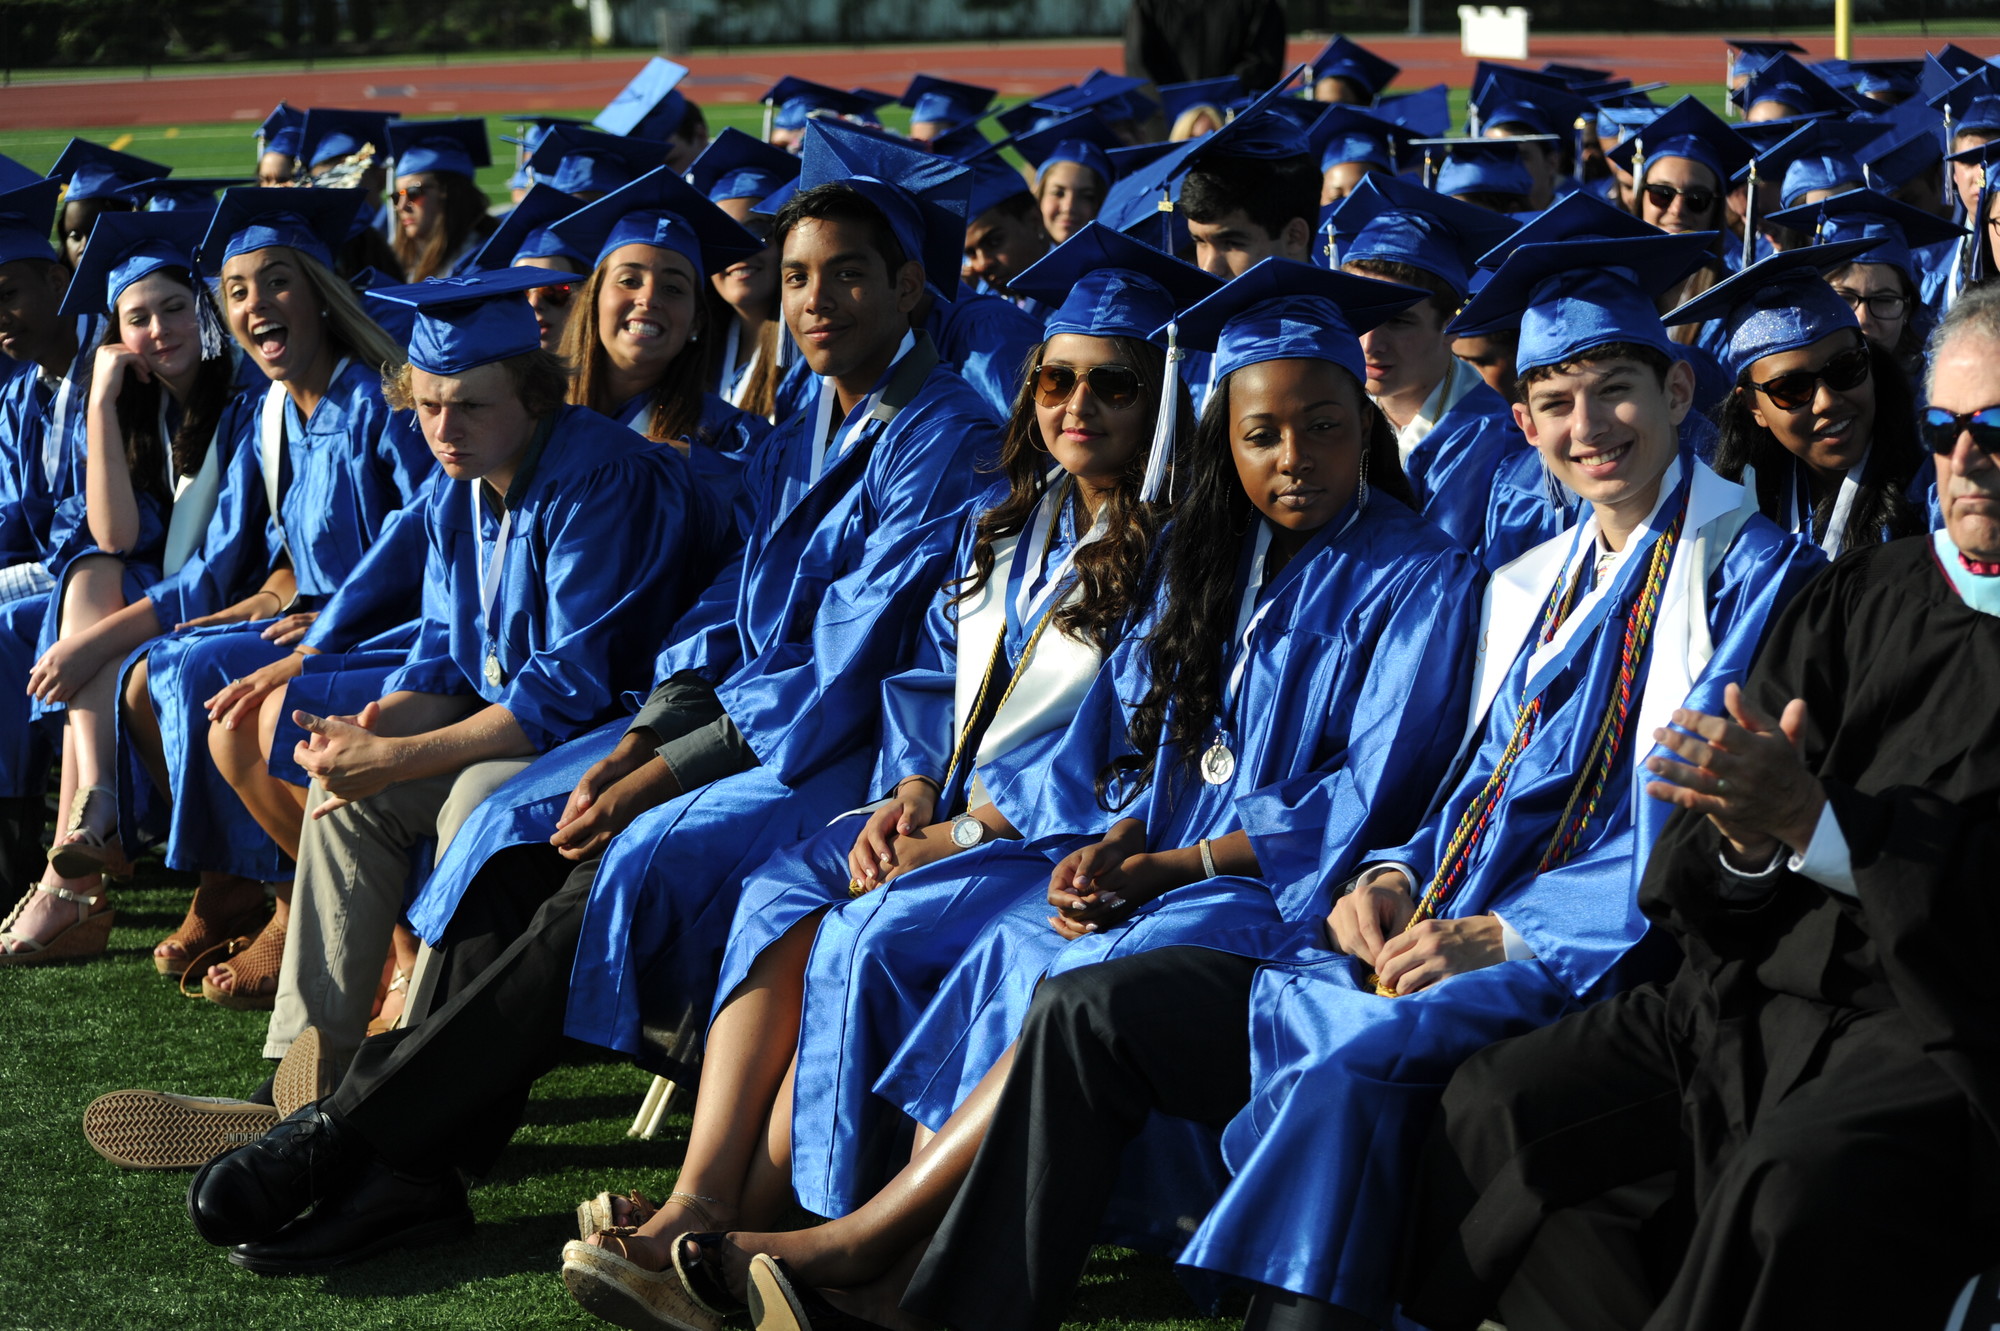 Members of the class of 2015 celebrated at the commencement ceremony.